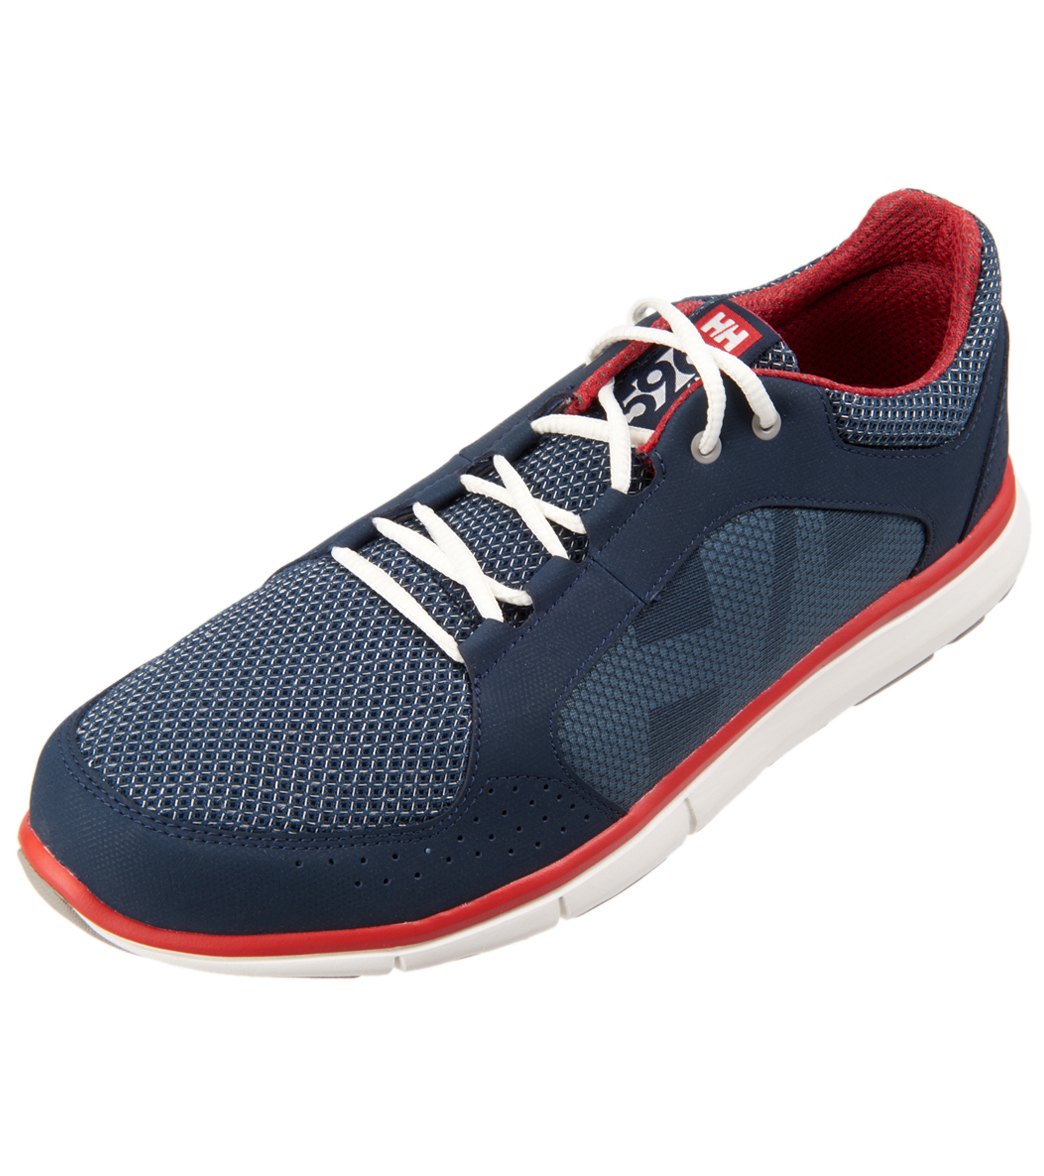 Helly Hansen Men's Ahiga V3 Hydropower Water Shoe - Navy/Flag Red/Off White 7.5 Rubber - Swimoutlet.com